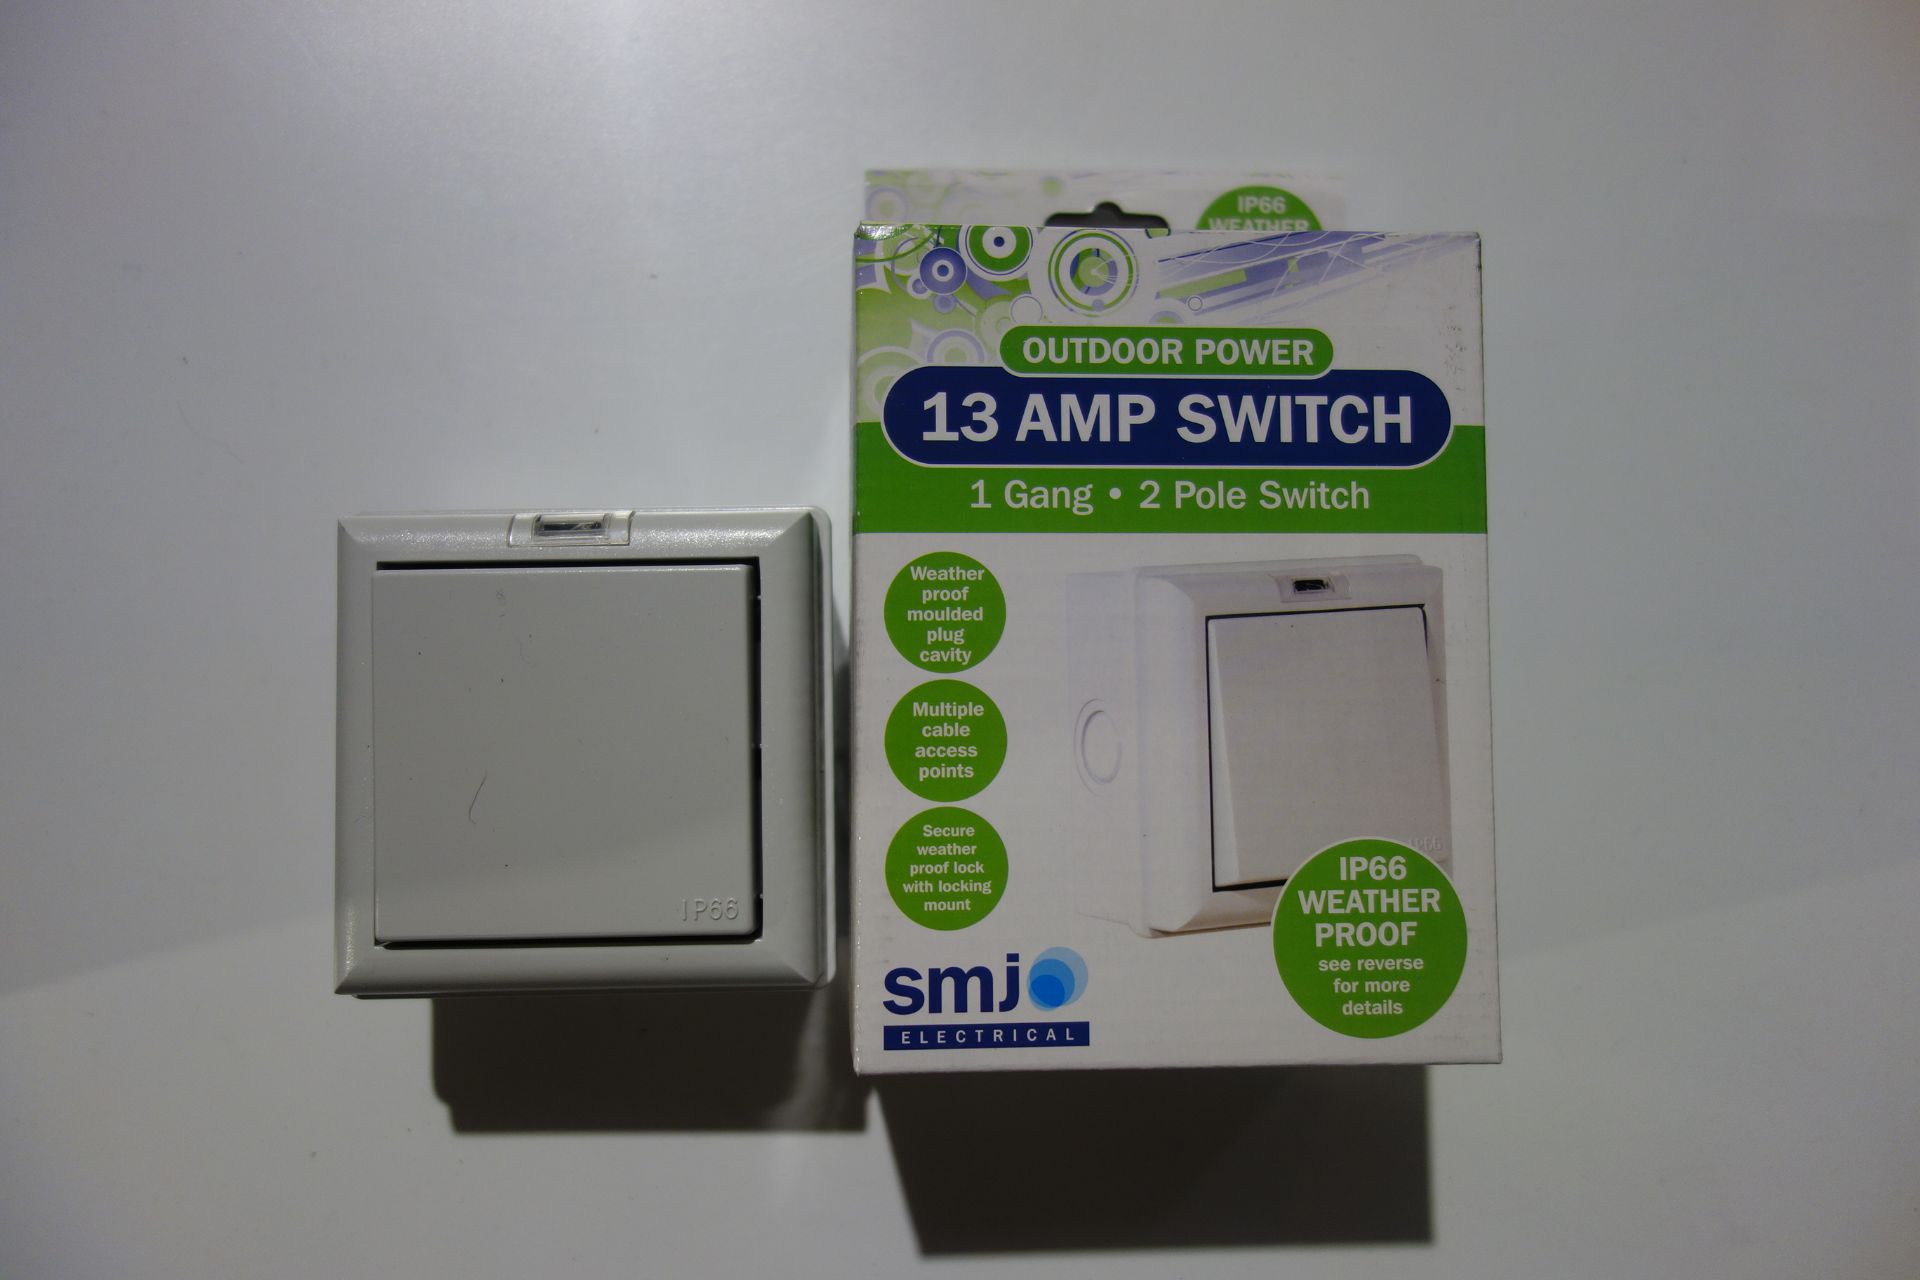 25 X SMJ E61G2P Outdoor 13AMP 1G 2P Switch IP66 Weather Proof